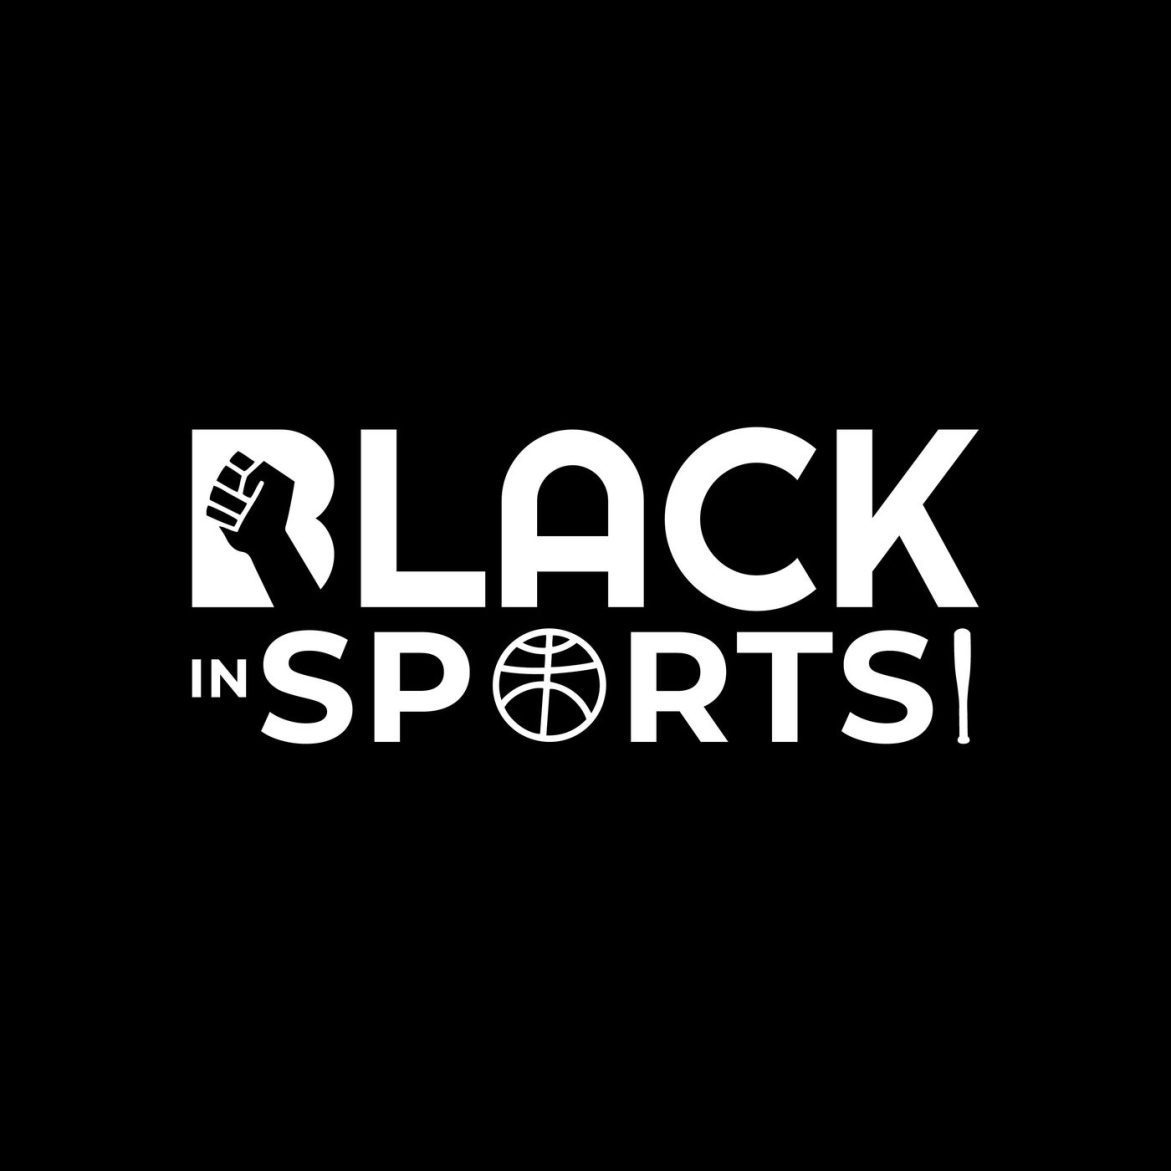 Black Podcasting - The Locker Room - S5 Ep 2 | Power Fathers: Next Generation in Sports